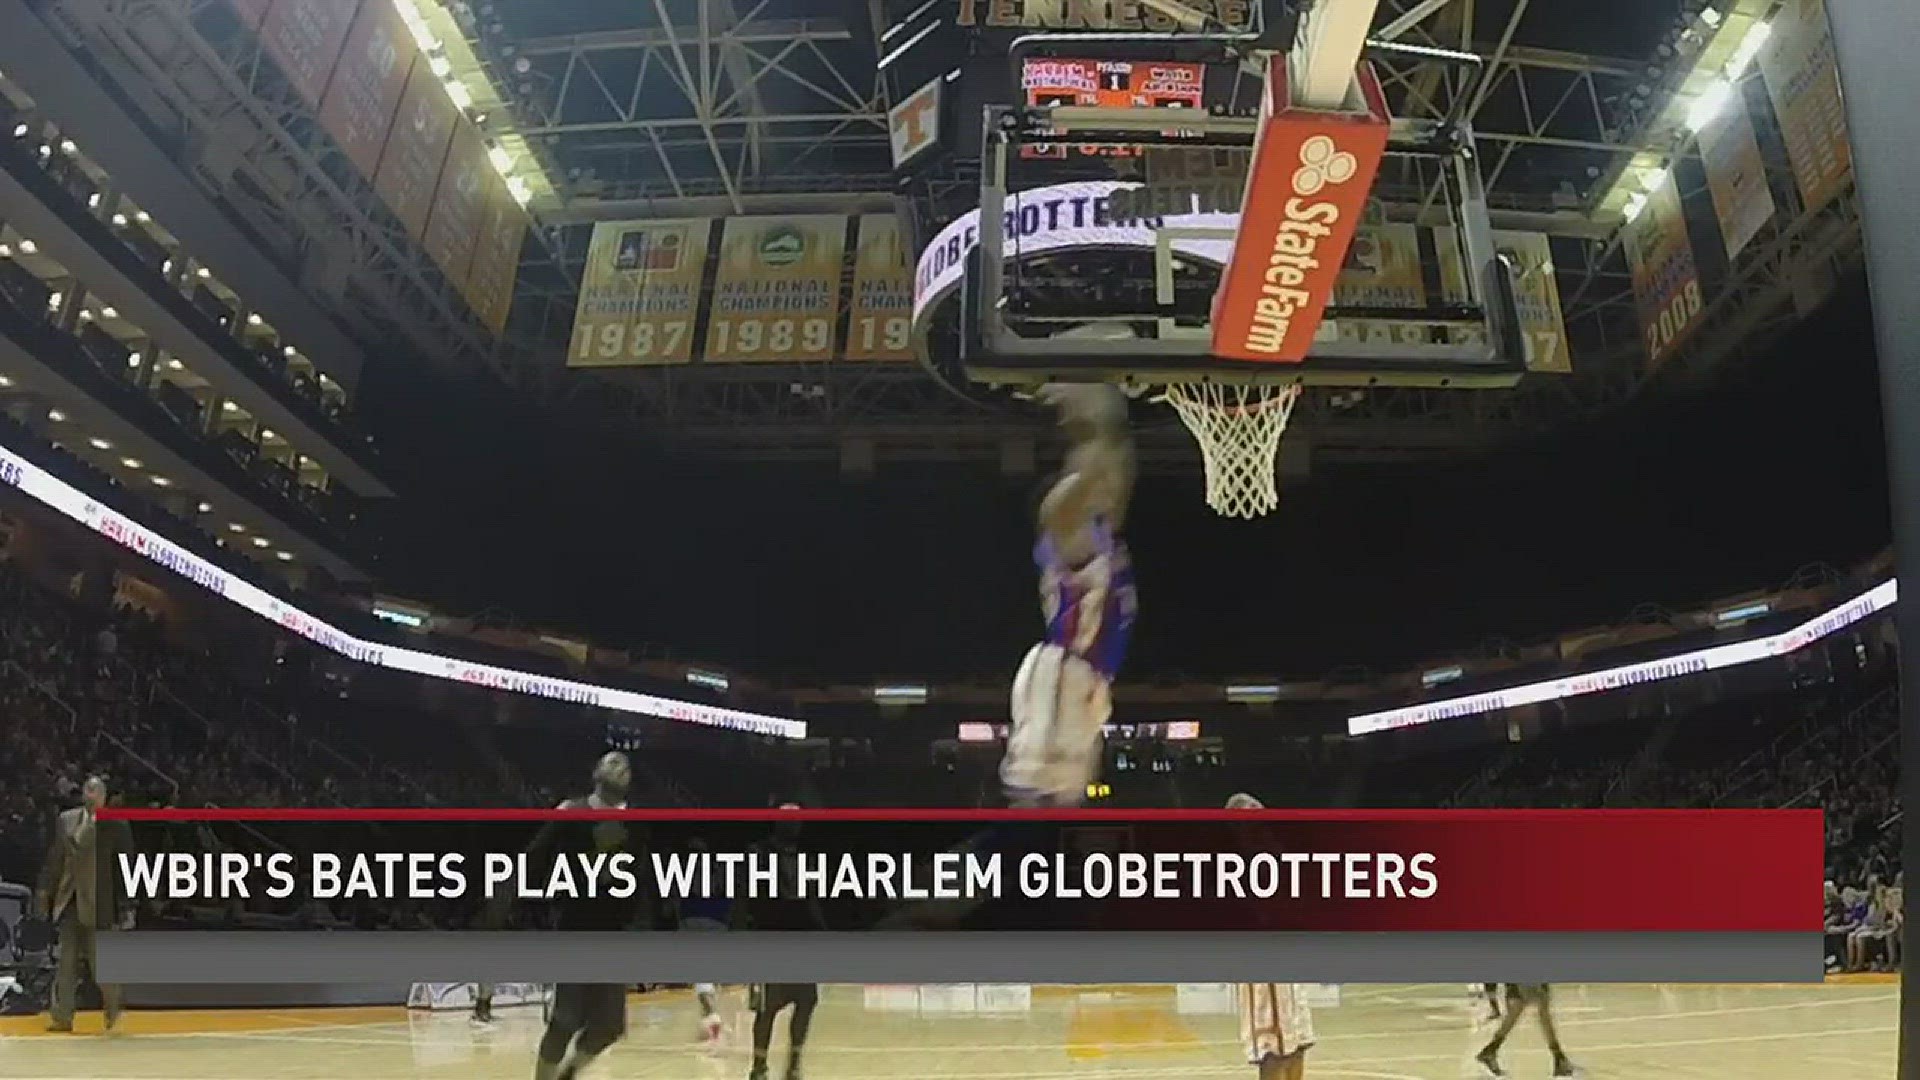 WBIR morning anchor Brandon Bates suited up in the red, white and blue of the Harlem Globetrotters on Tuesday night at Thompson-Boling Arena. He had to guard the World All-Stars' secret weapon, a 7-footer named Cager.